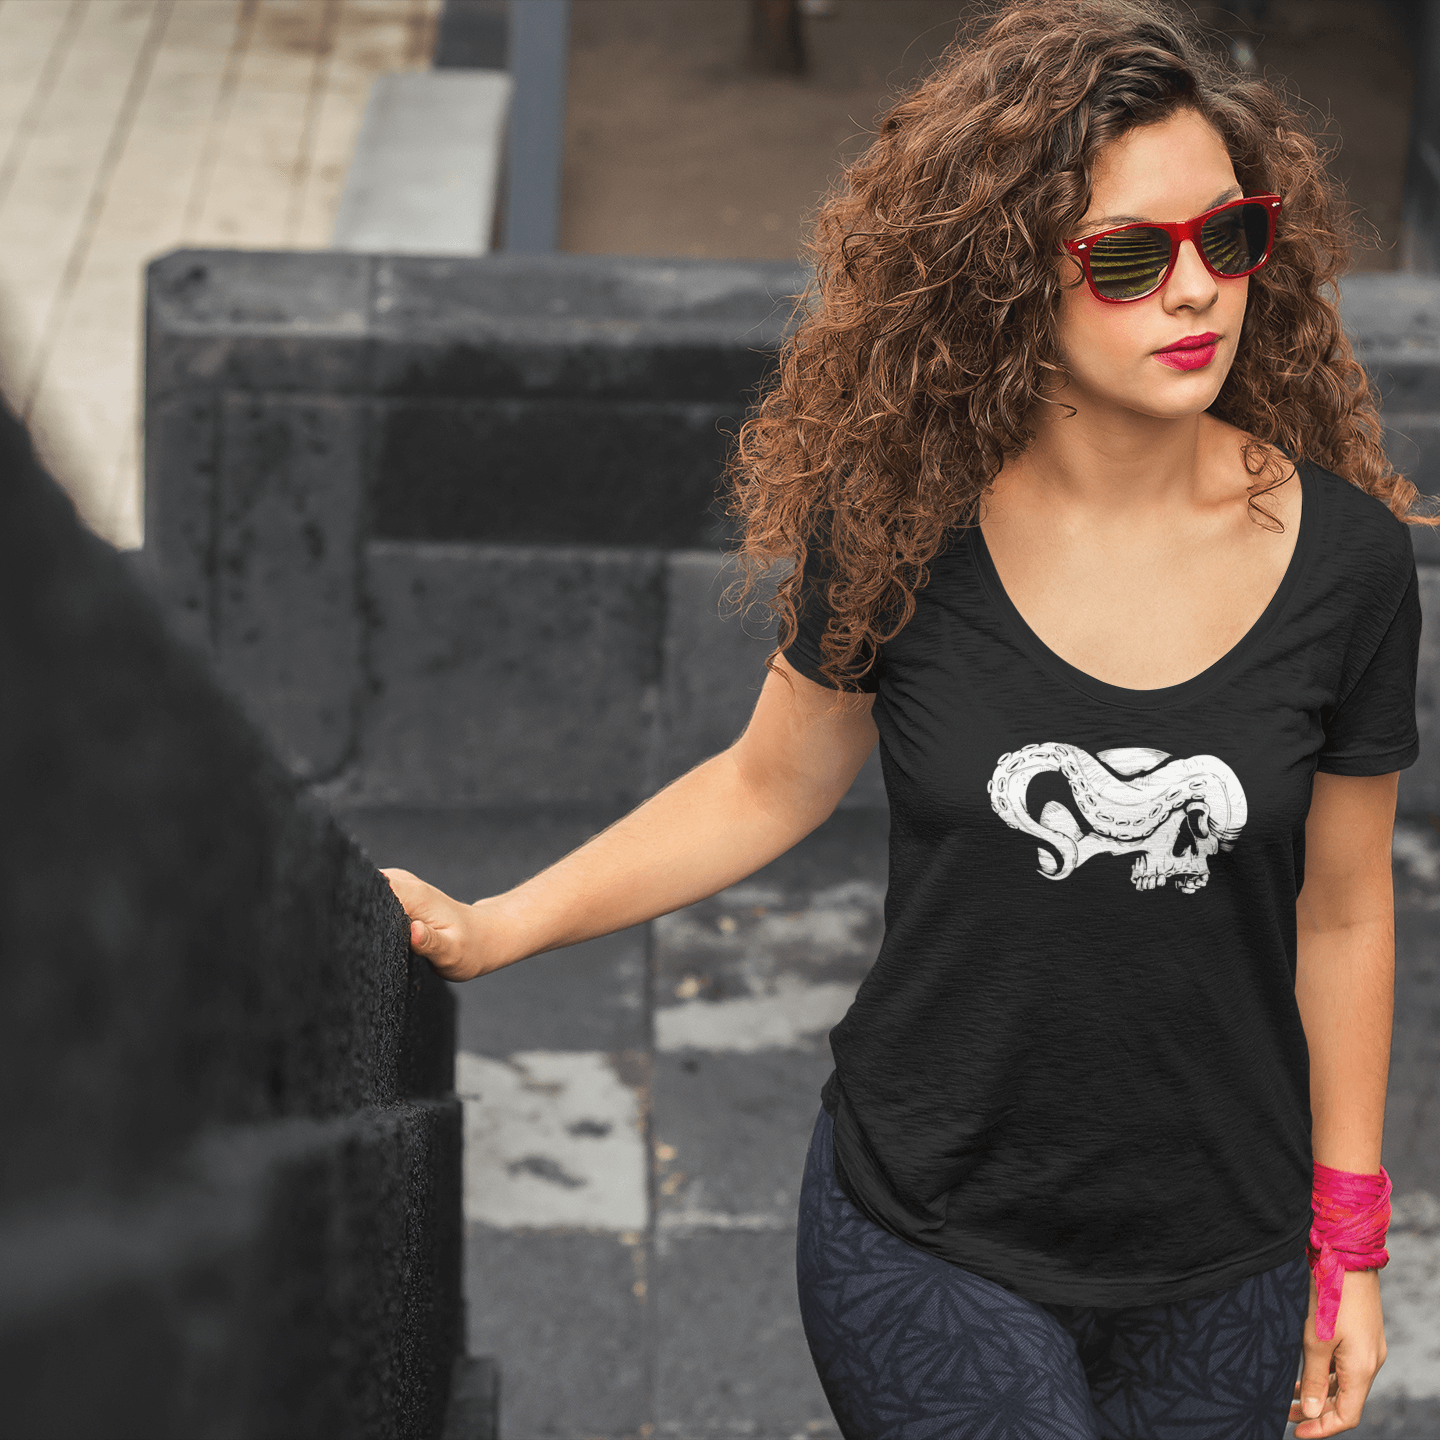 Woman with long hair wearing a black scoop neck shirt with skull and tentacle print